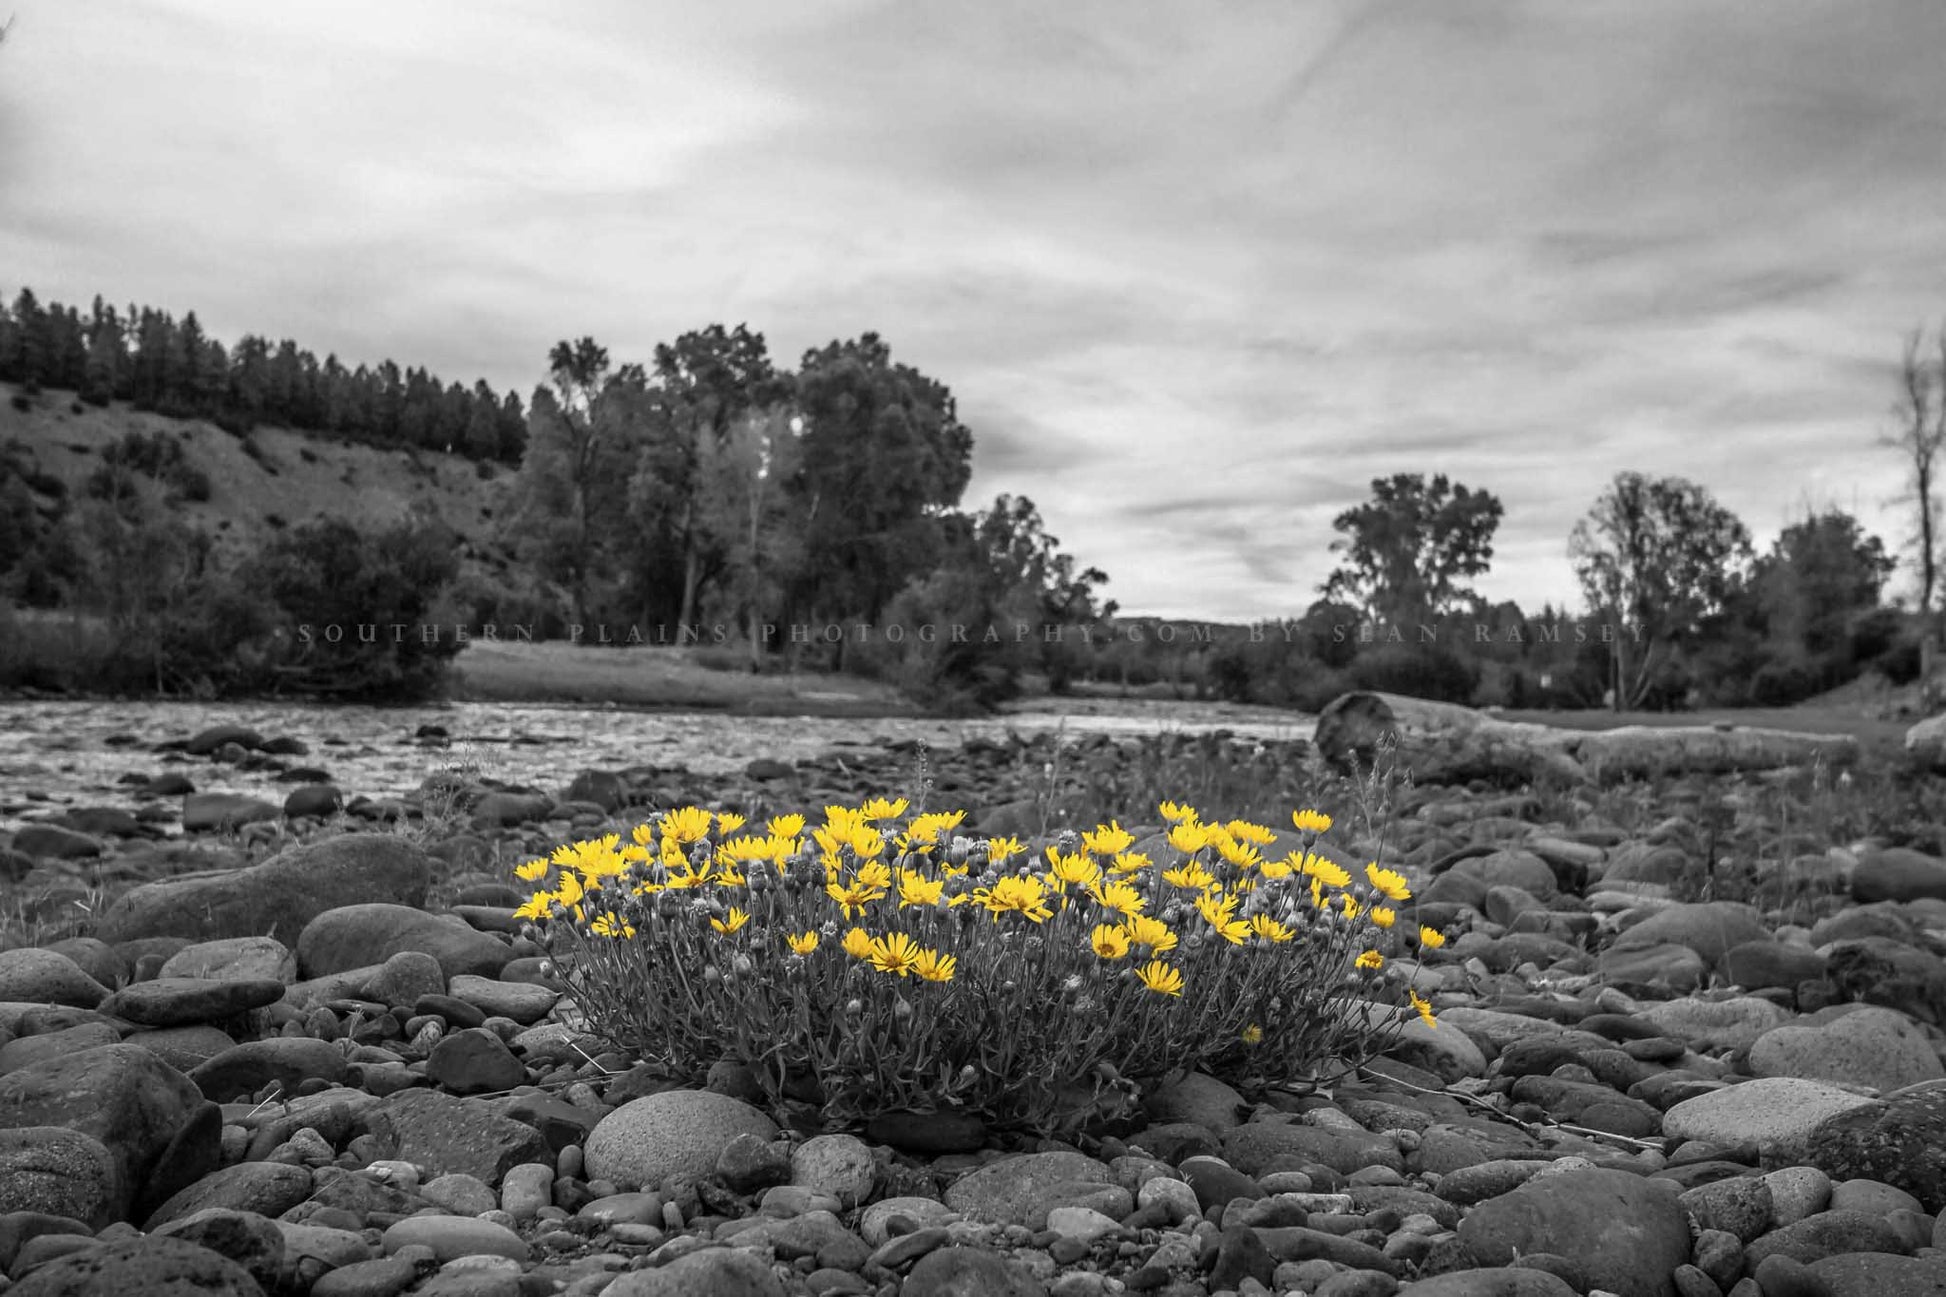 Color on black and white botanical photography print of yellow wildflowers along the river banks of the San Juan River in the Rocky Mountains of Colorado by Sean Ramsey of Southern Plains Photography.